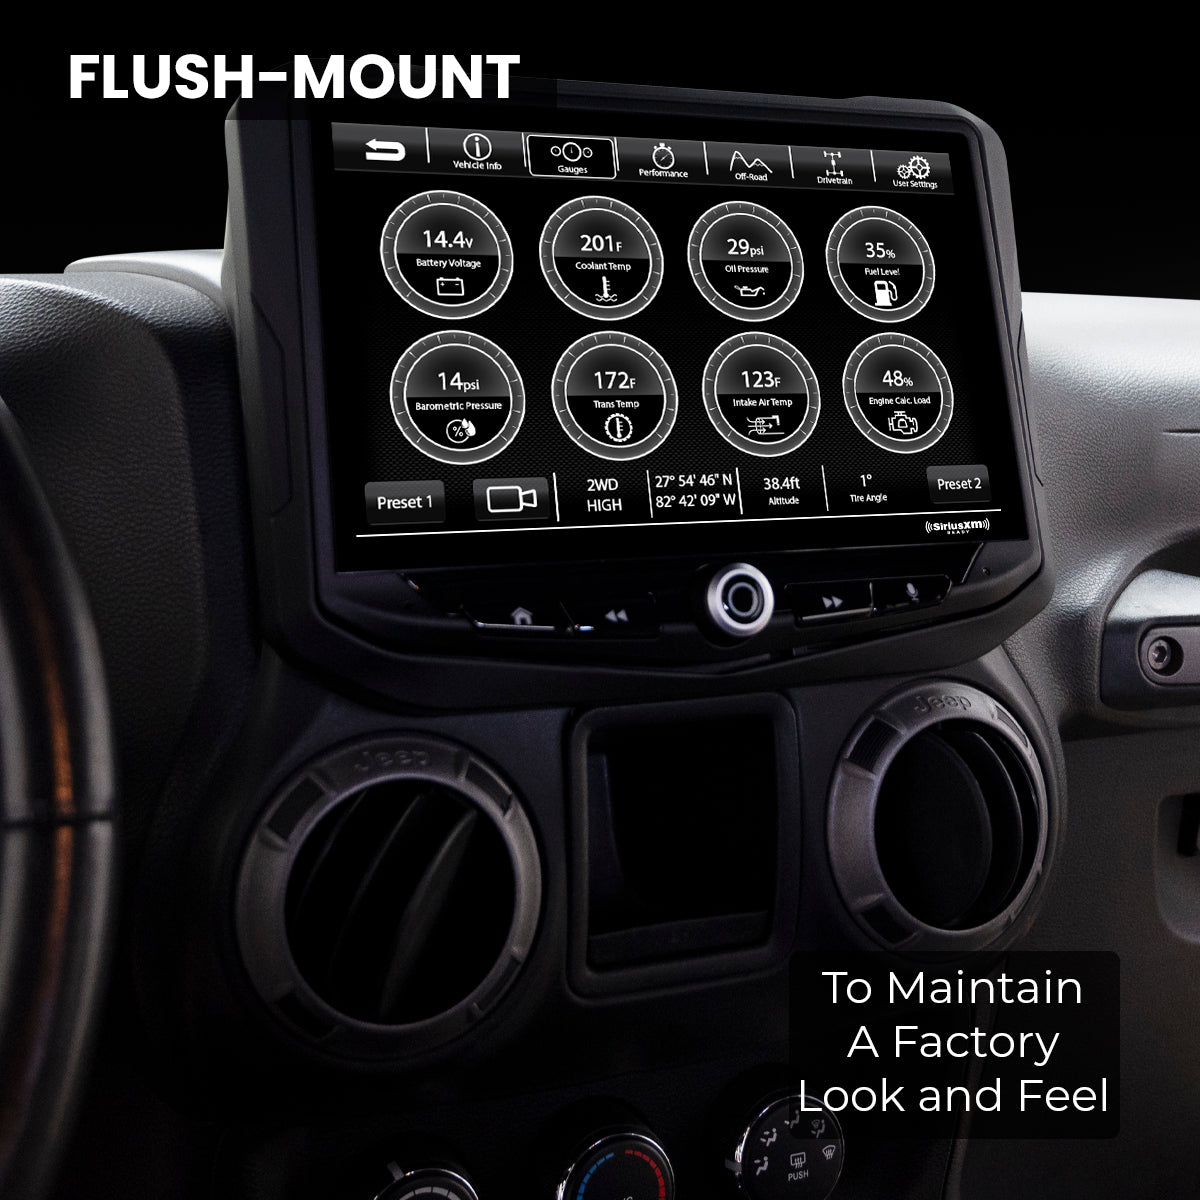 Jeep Wrangler JK (2011-2018) HEIGH10 10" Radio Fully Integrated Kit | Displays Vehicle Information and Off-Road Mode